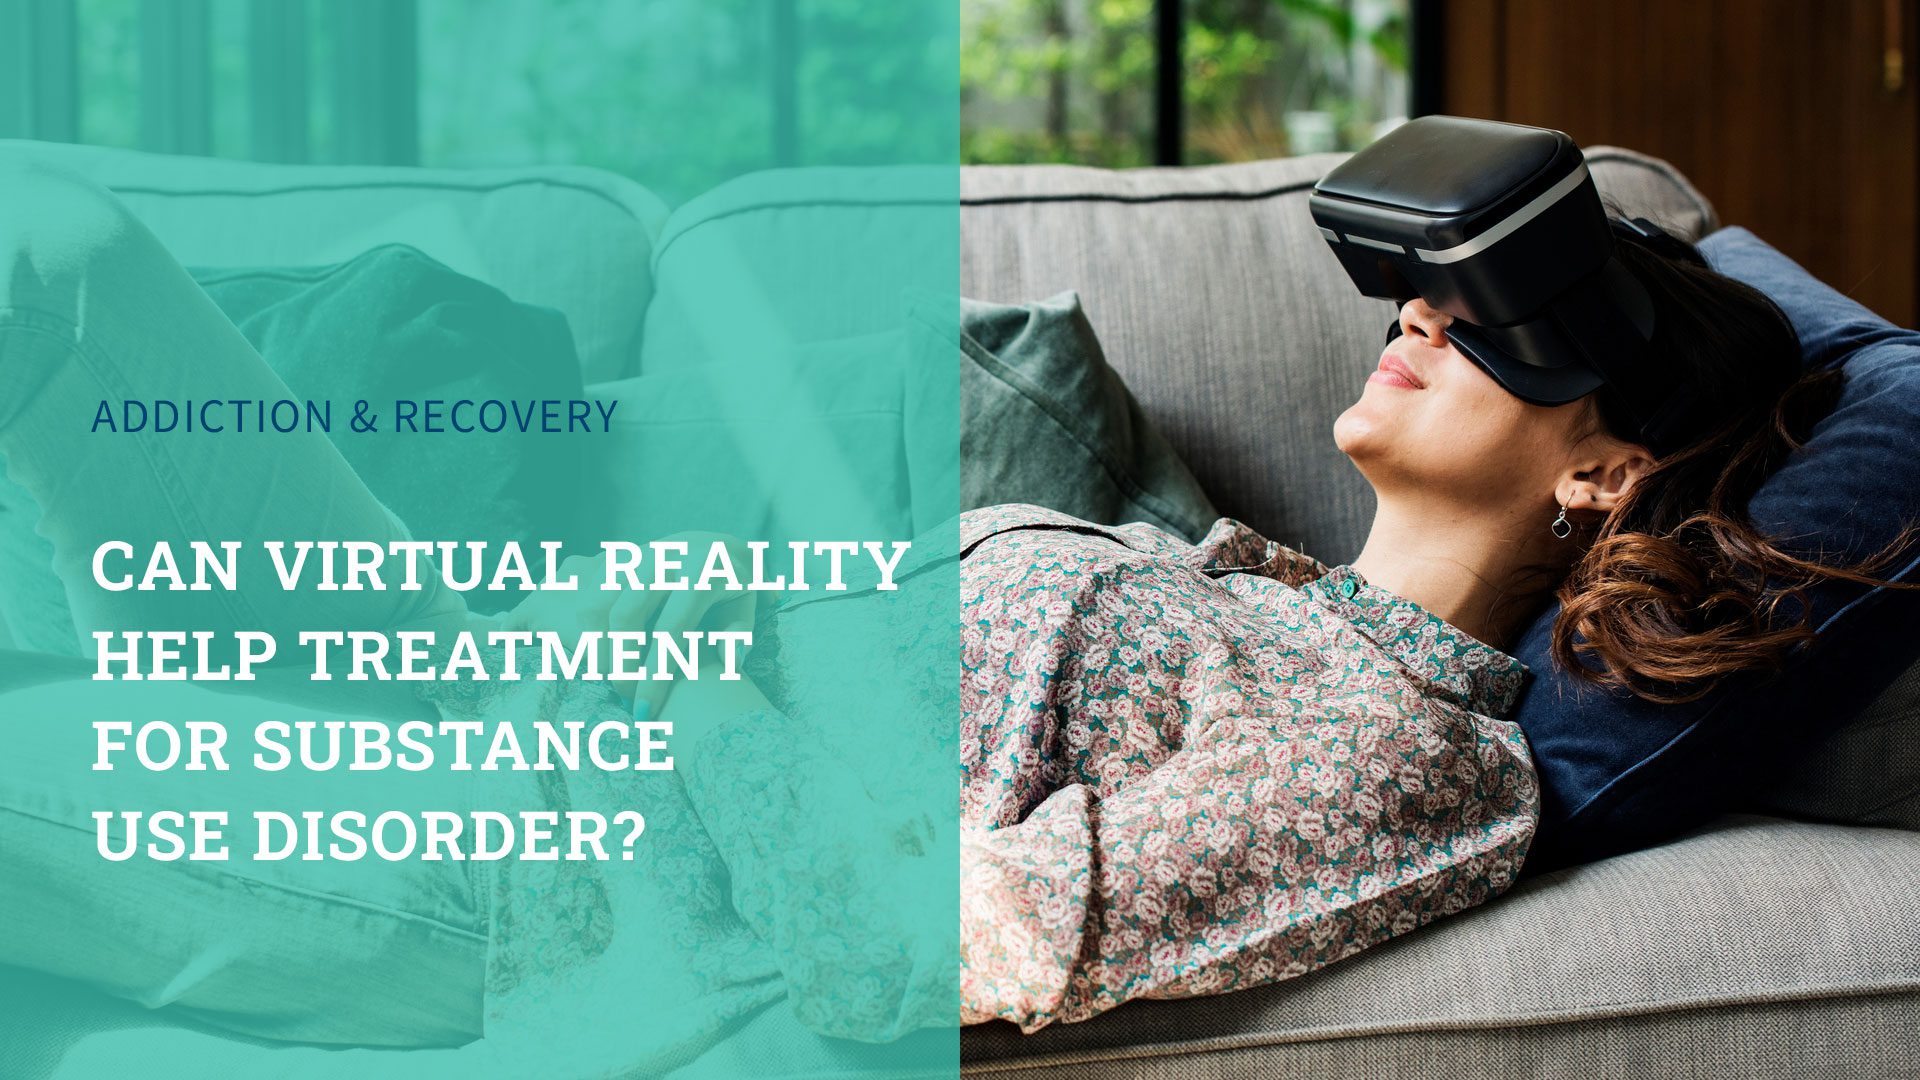 Can Virtual Reality Help Treatment for Substance Use Disorder?